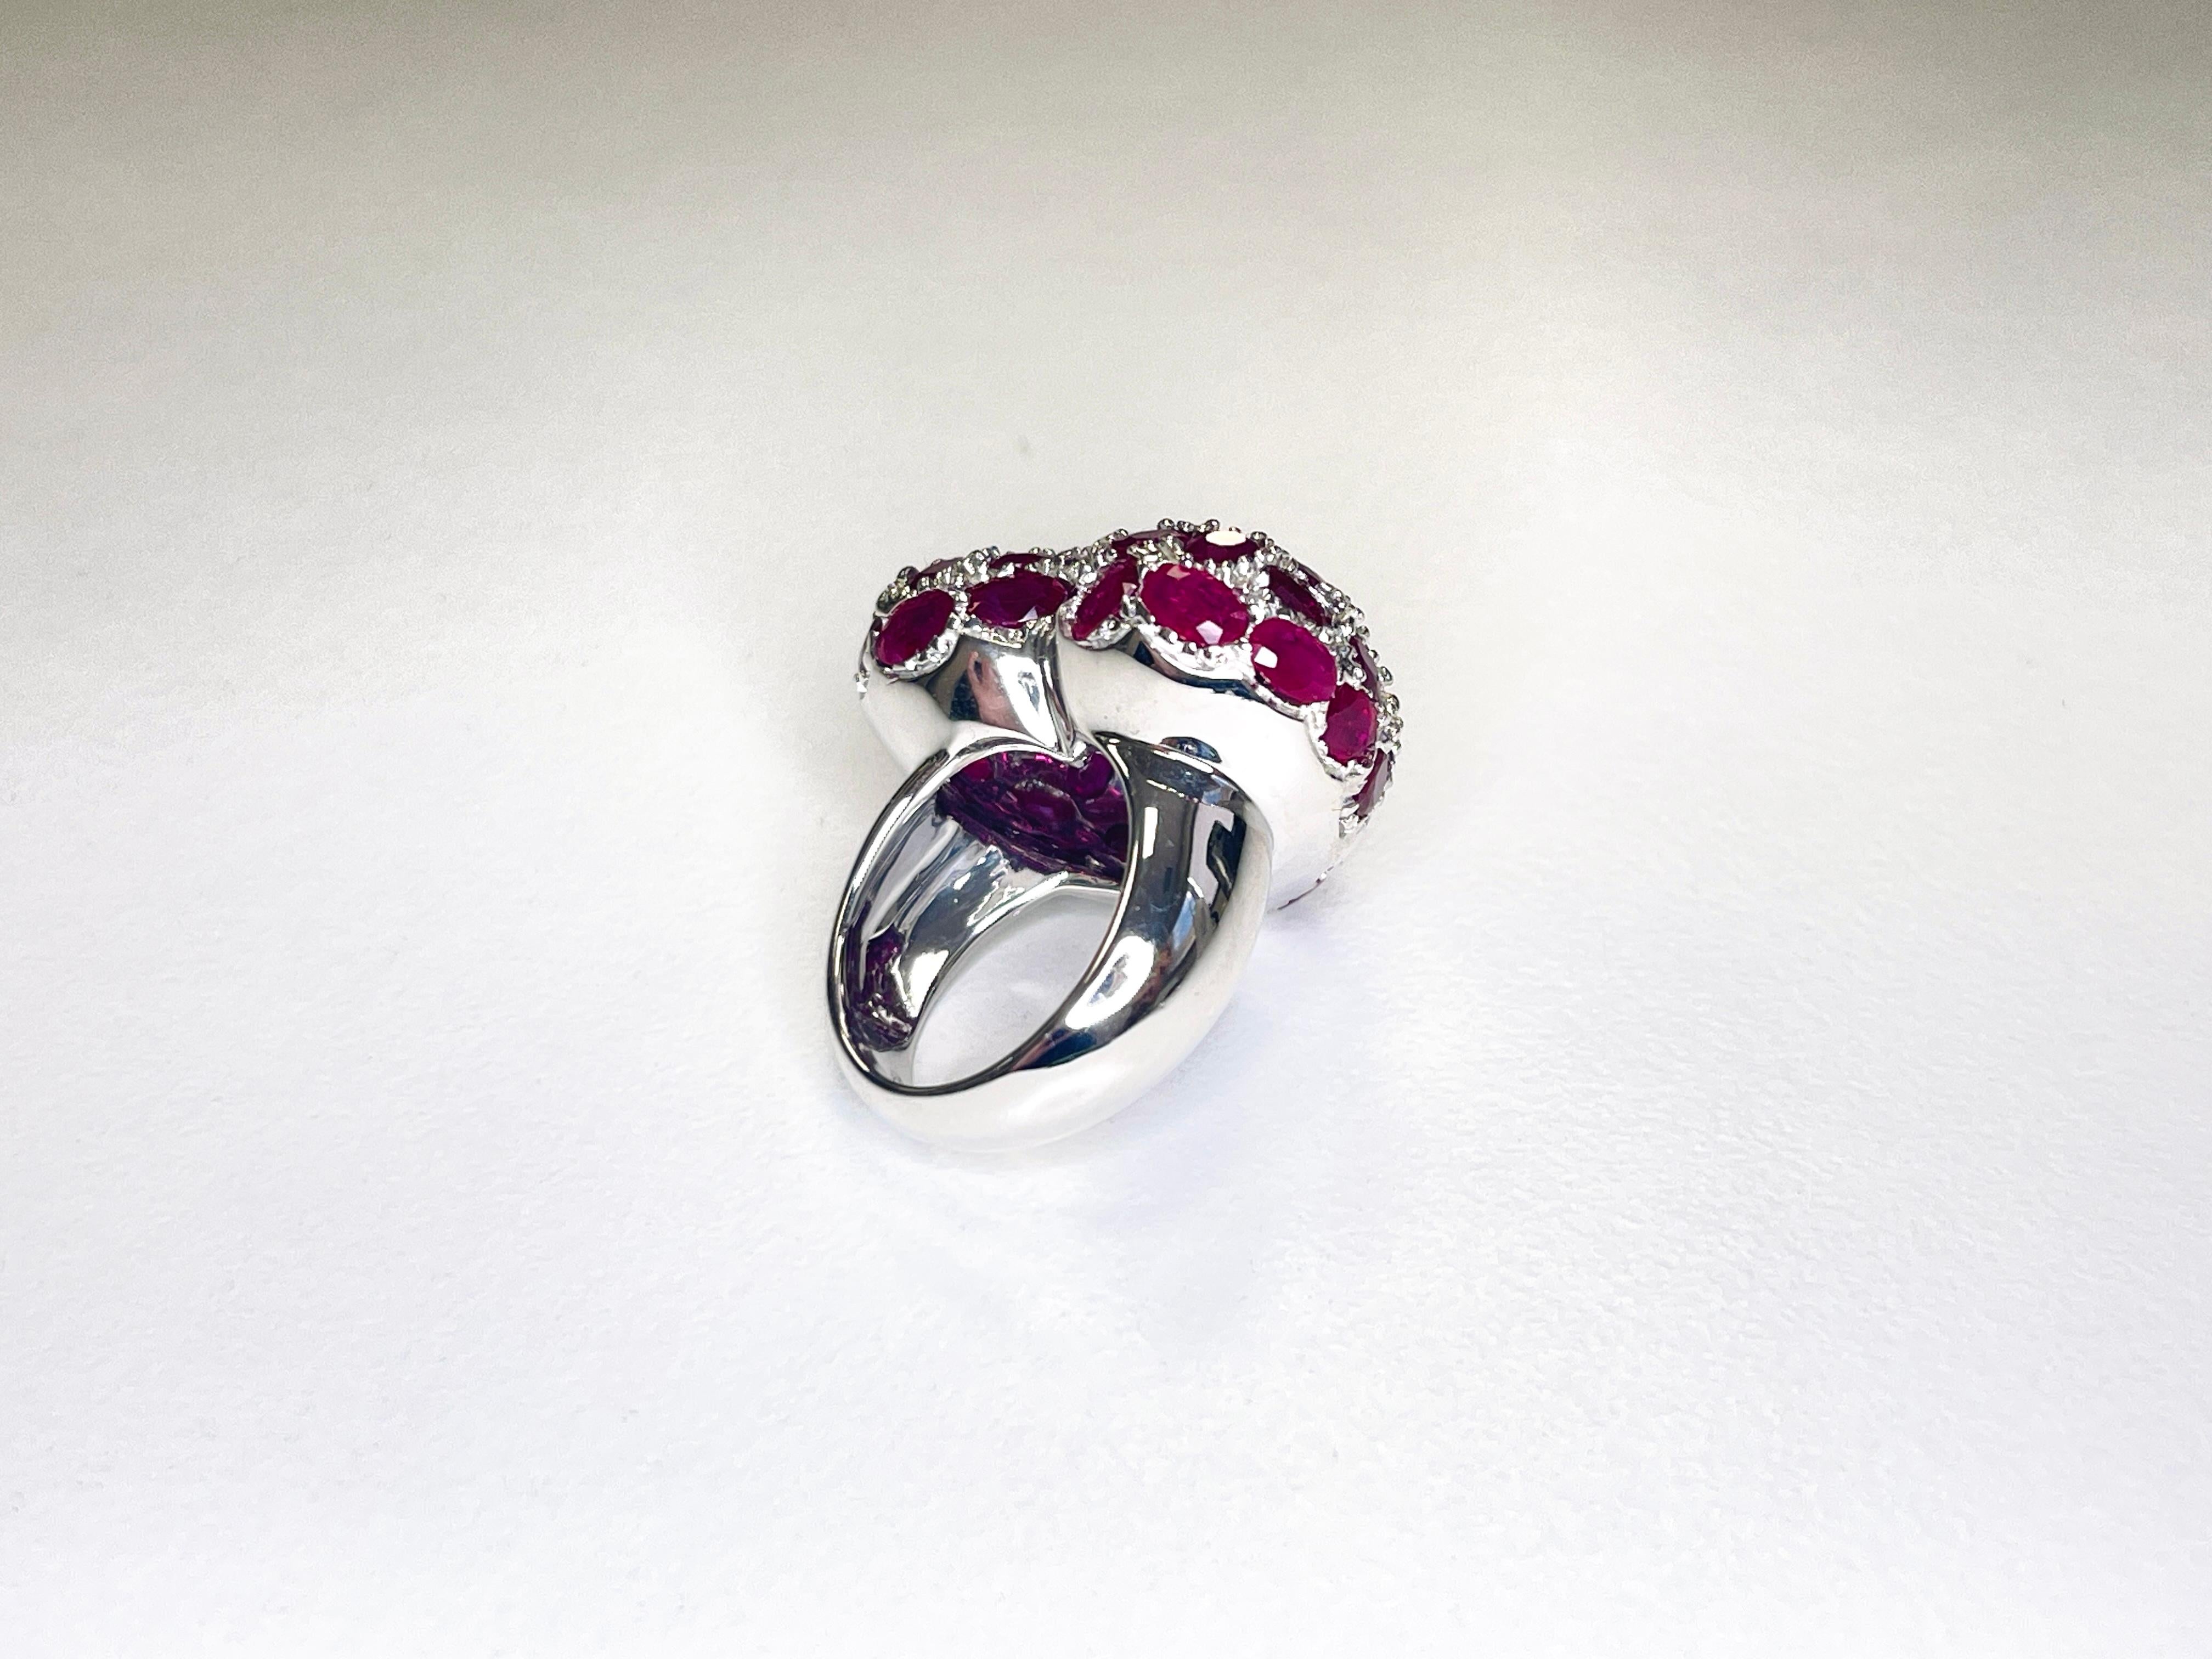 16.50cts White Gold Heart Ruby Oval Shape High Polished Rhodium Ring 18K 7 Inch 2